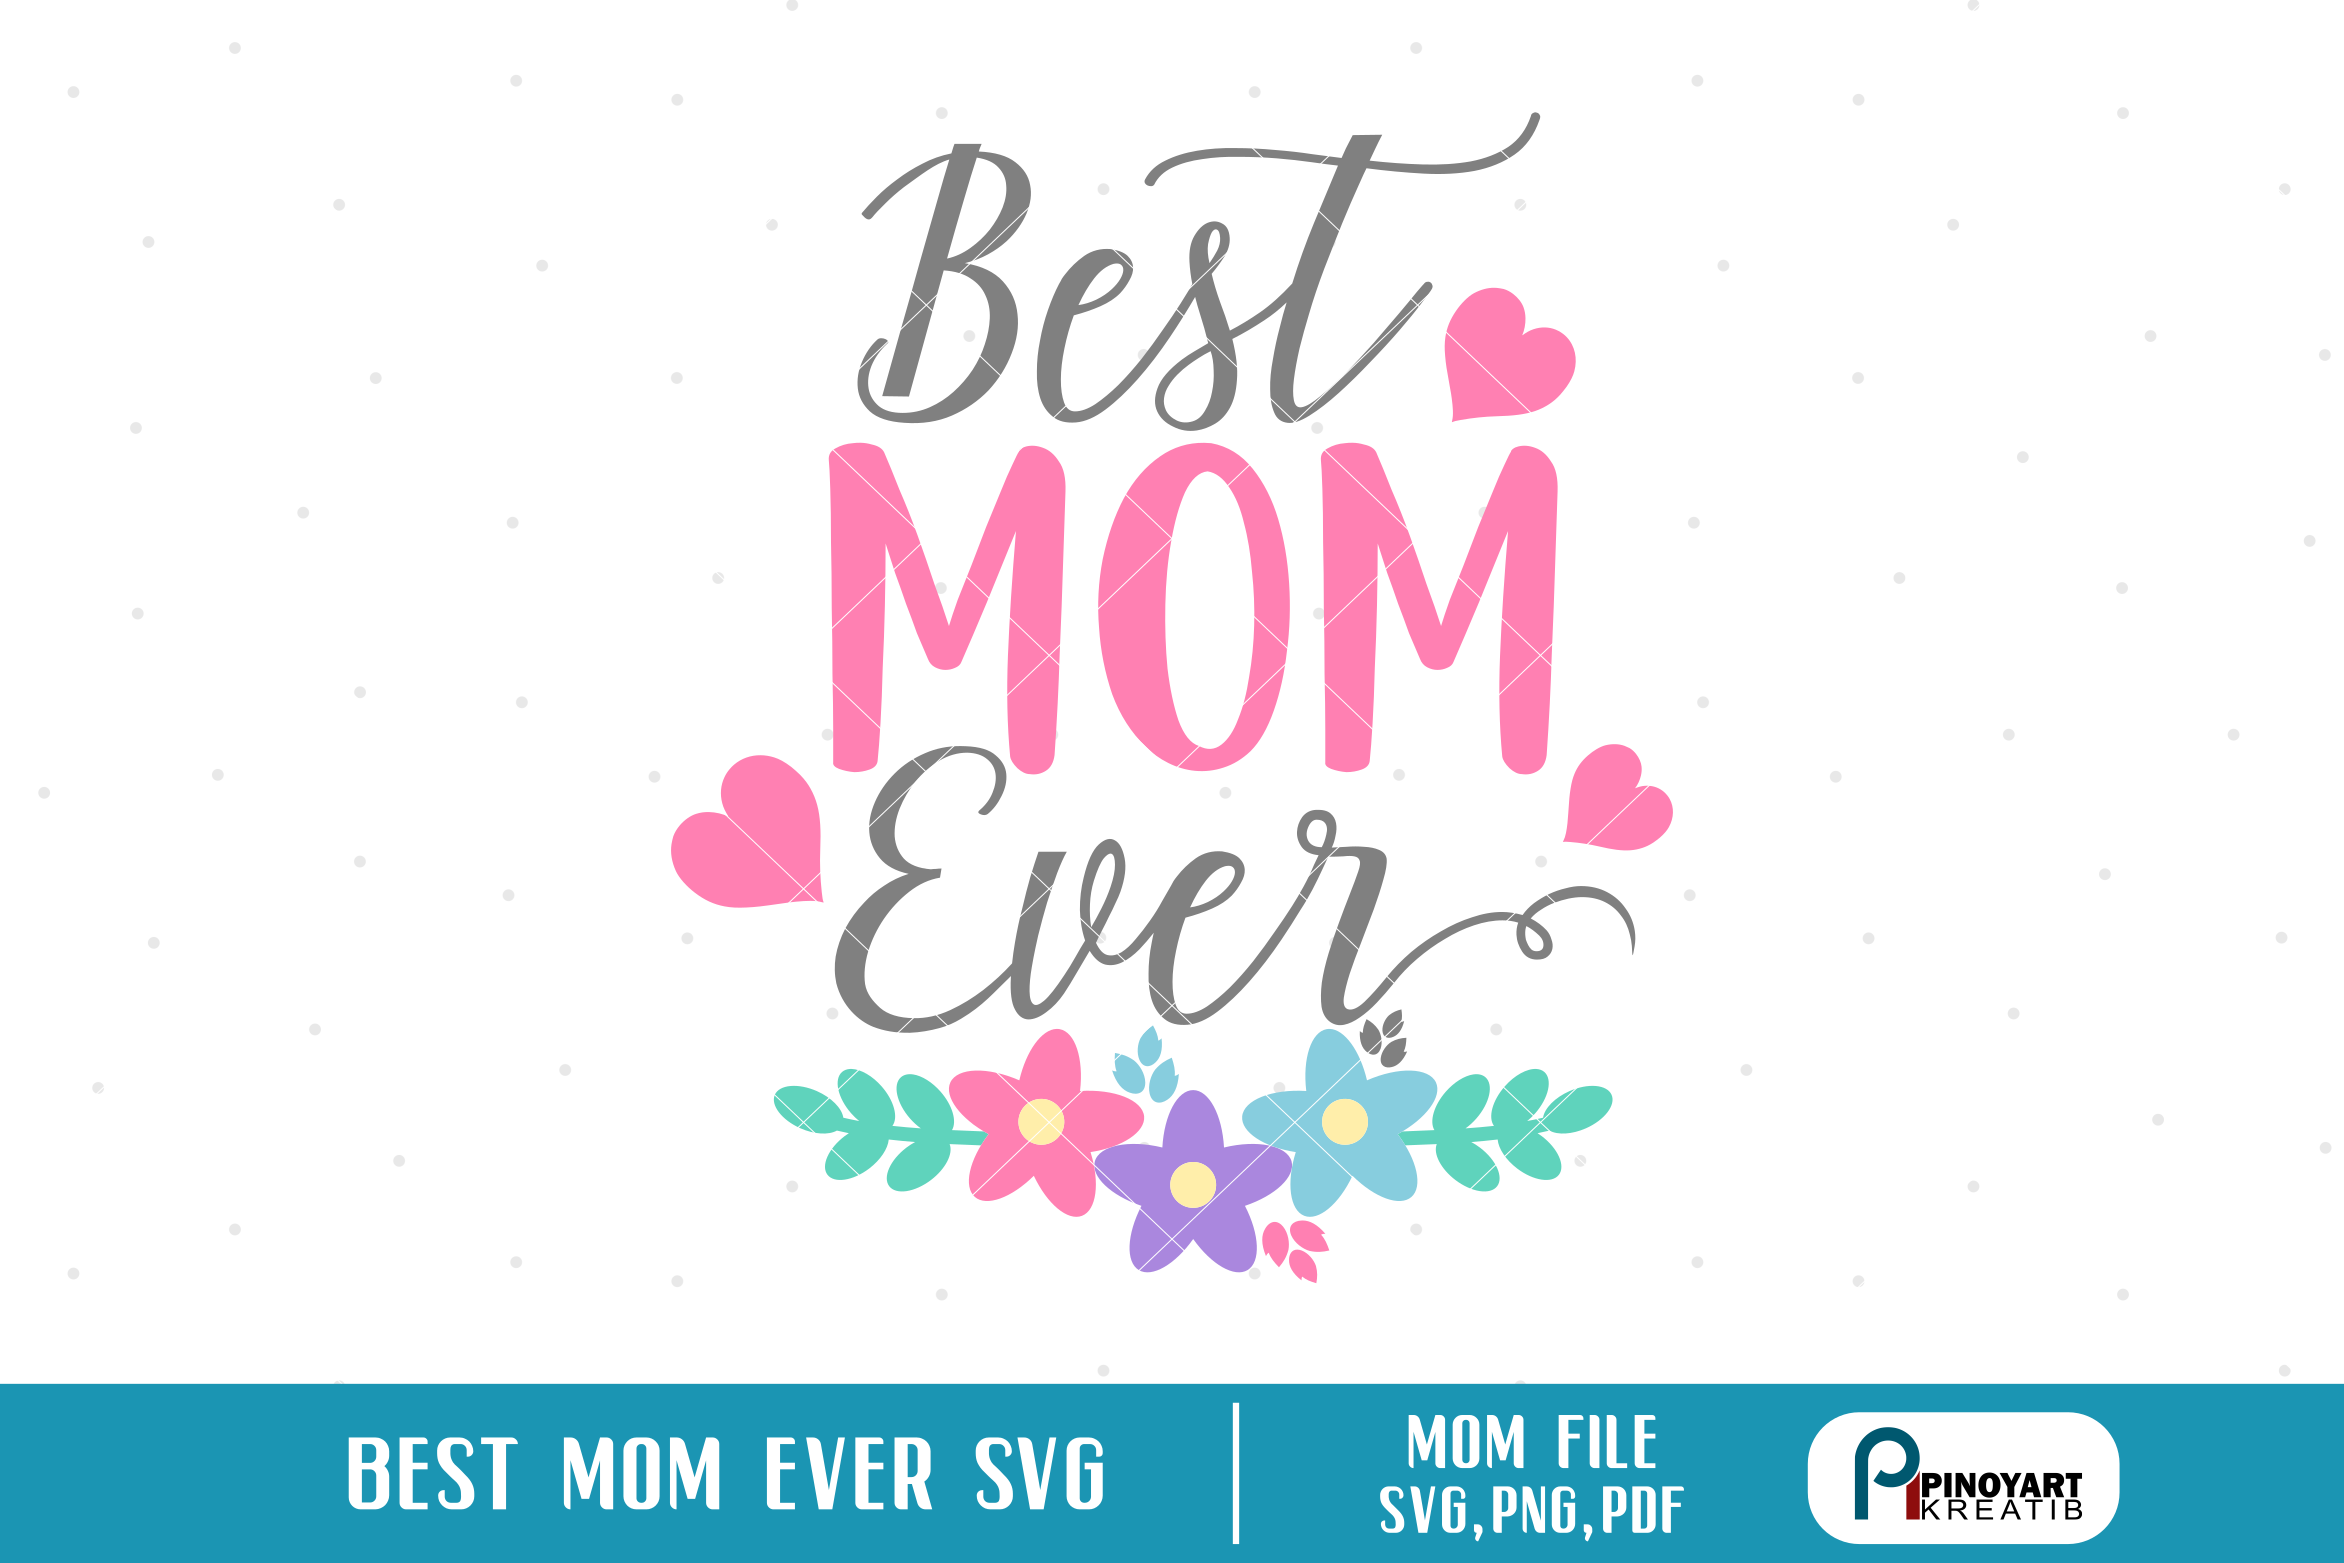 Download Love Svg Mothers Day - Layered SVG Cut File